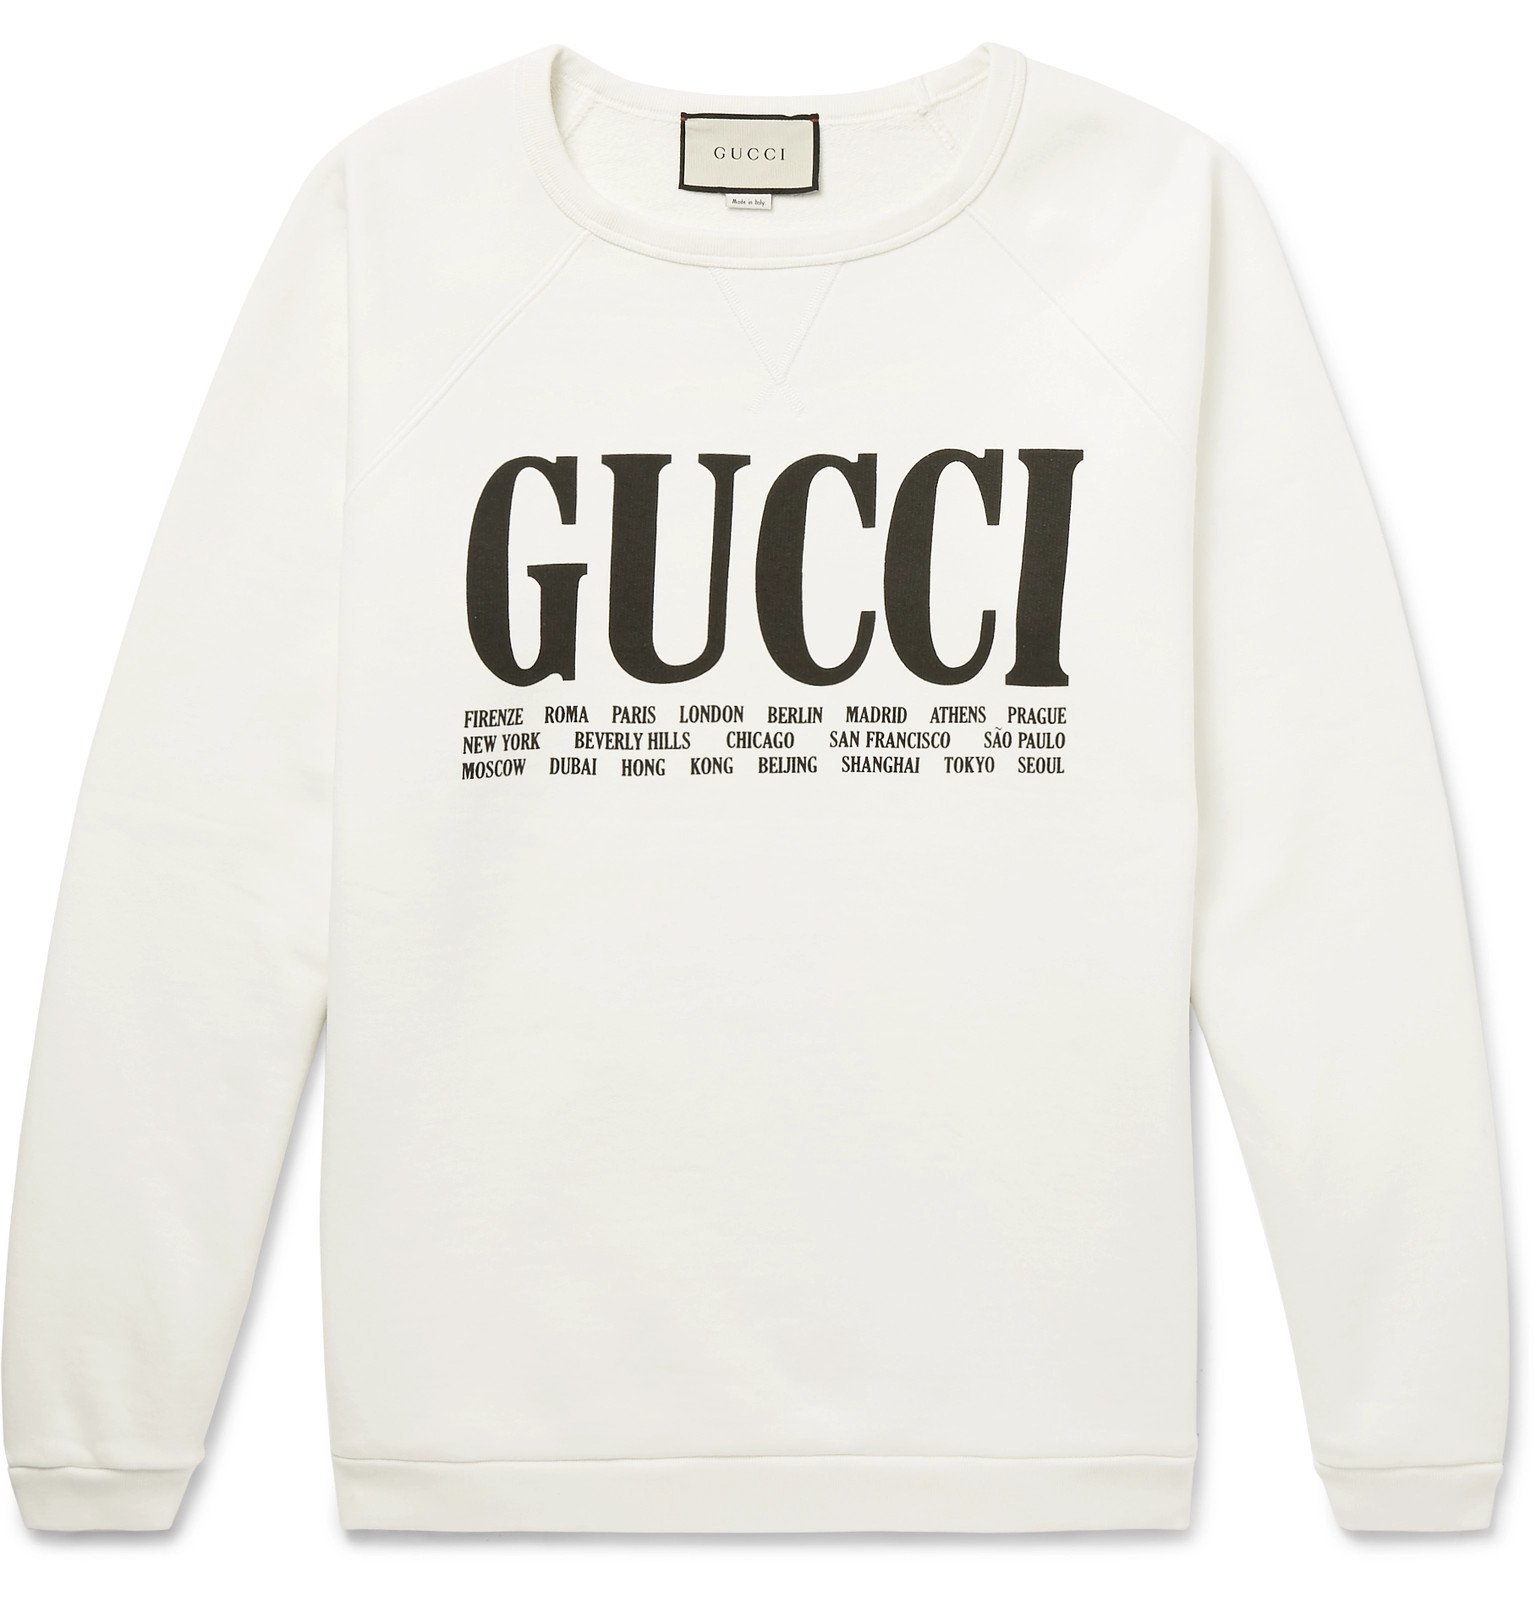 Gucci - Printed Cotton-Jersey 